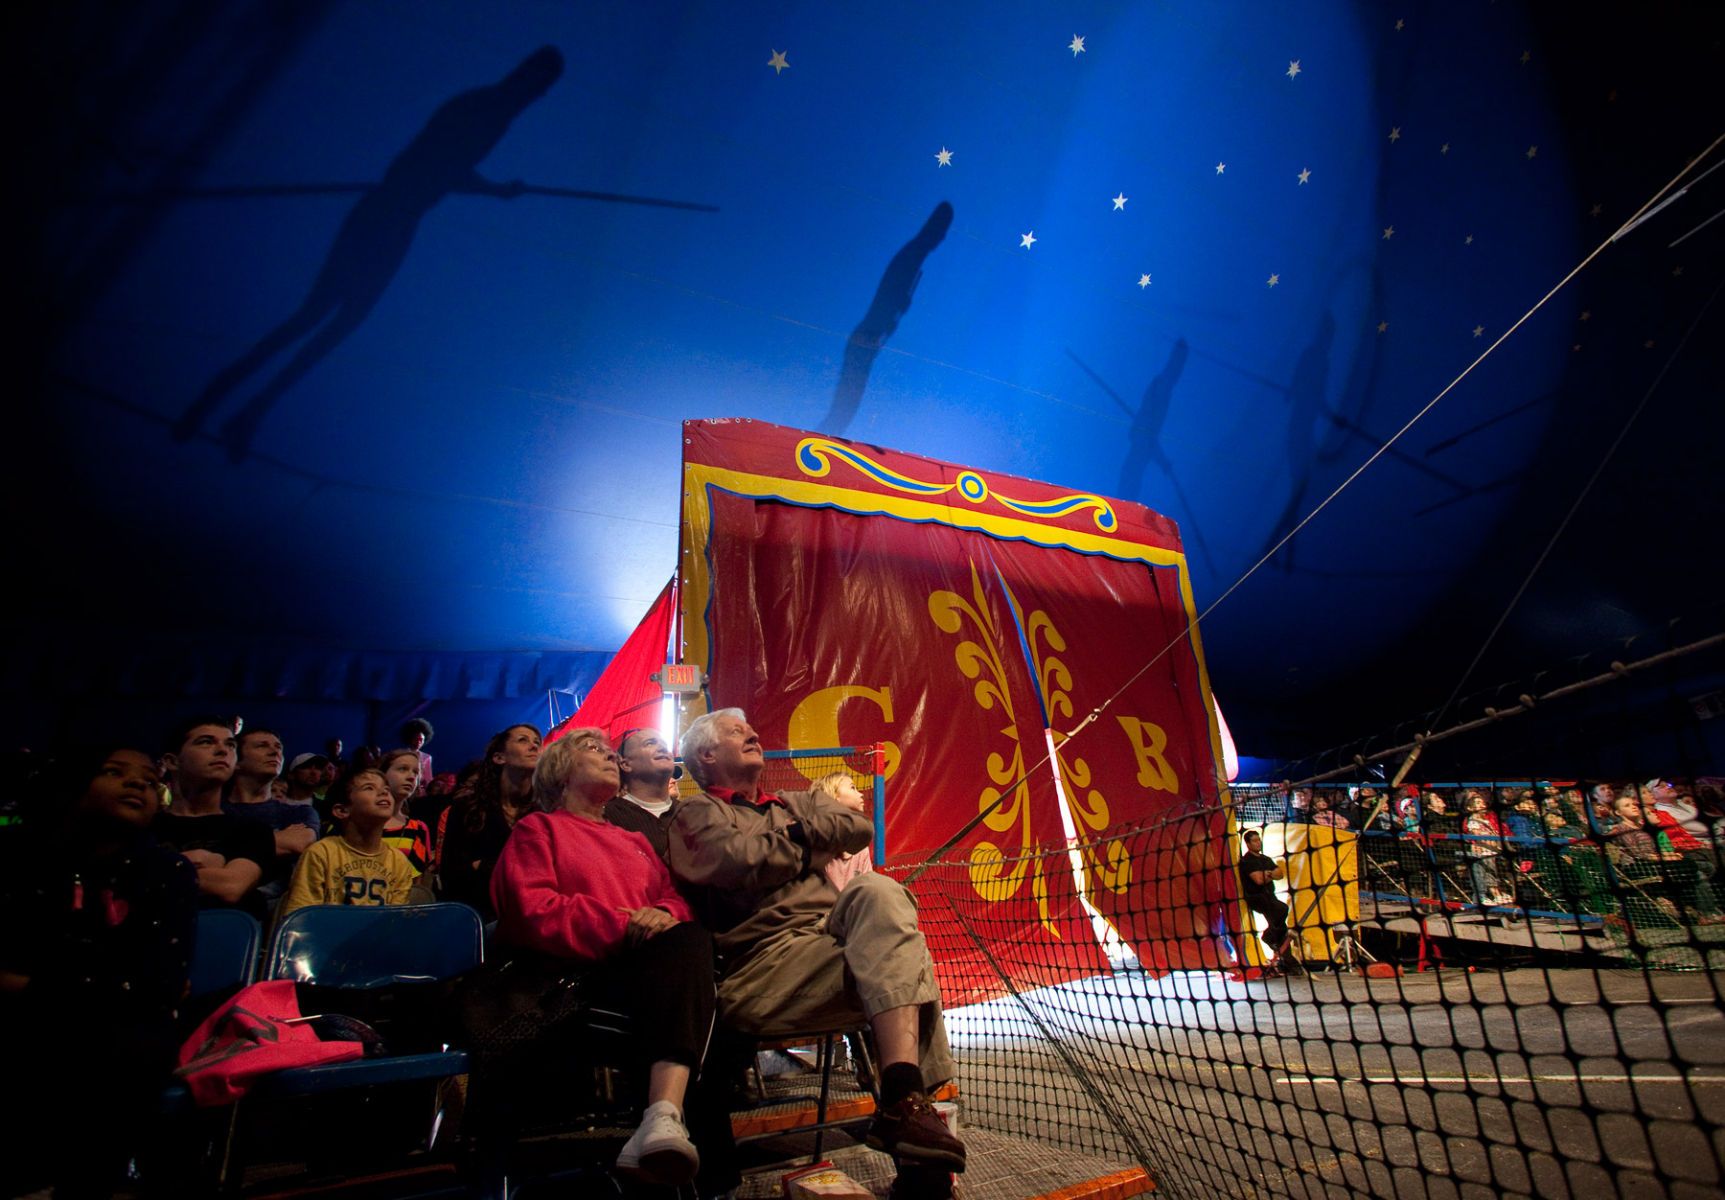 Patrons watch as the Tabares High Wire troupe performs at the Cole Brothers Circus of the Stars in Myrtle Beach, South Carolina March 31, 2013. Traveling circuses such as the Cole Brothers Circus of the Stars, complete with it's traveling big top tent, set up their tent city in smaller markets all along the East Coast of the United States as they aim to bring the circus to rural areas. The Cole Brothers Circus, now in its 129th edition, travels to 100 cities in 20-25 states and stages 250 shows a year.   REUTERS/Randall Hill   (UNITED STATES)